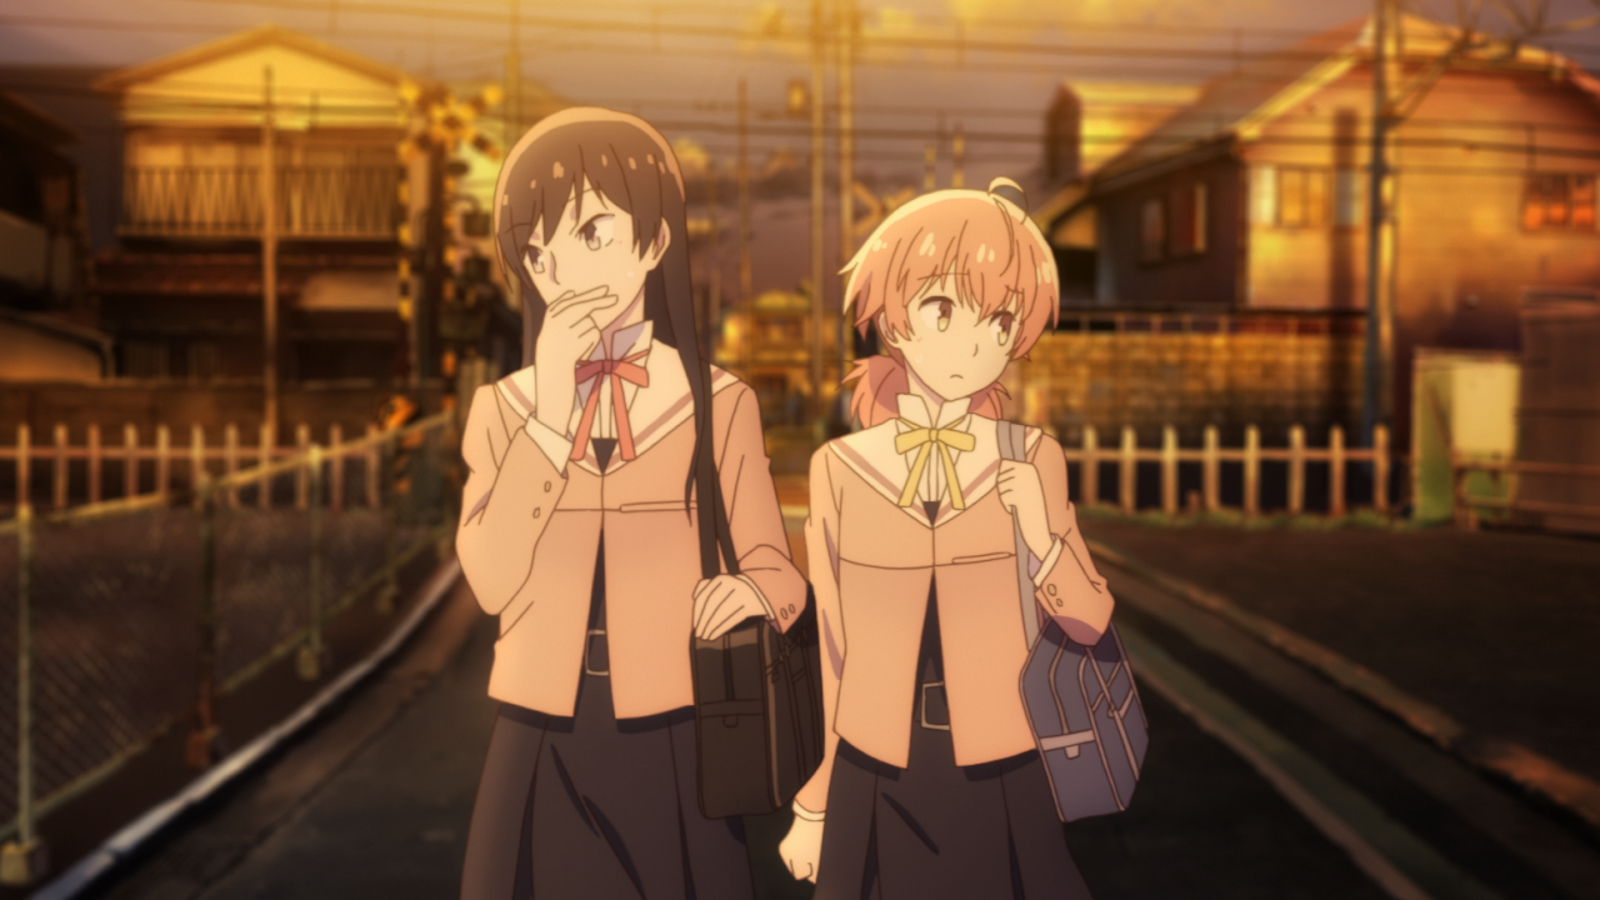 Bloom Into You - Volume 1: Episode 01-04 Blu-ray Image 6